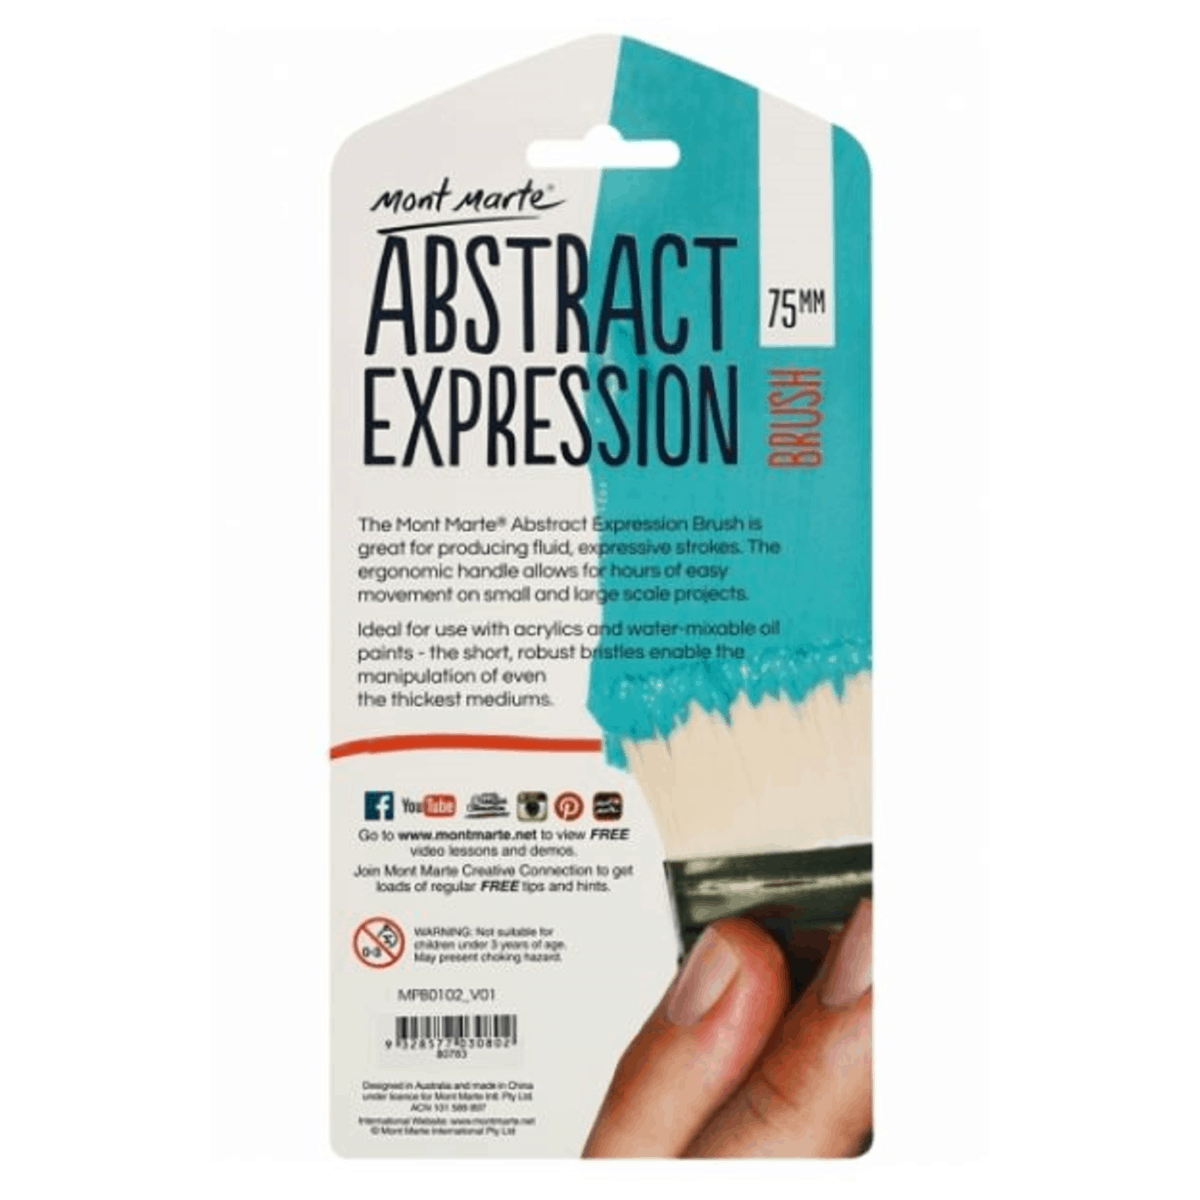 Abstract Expression Brush 75mm